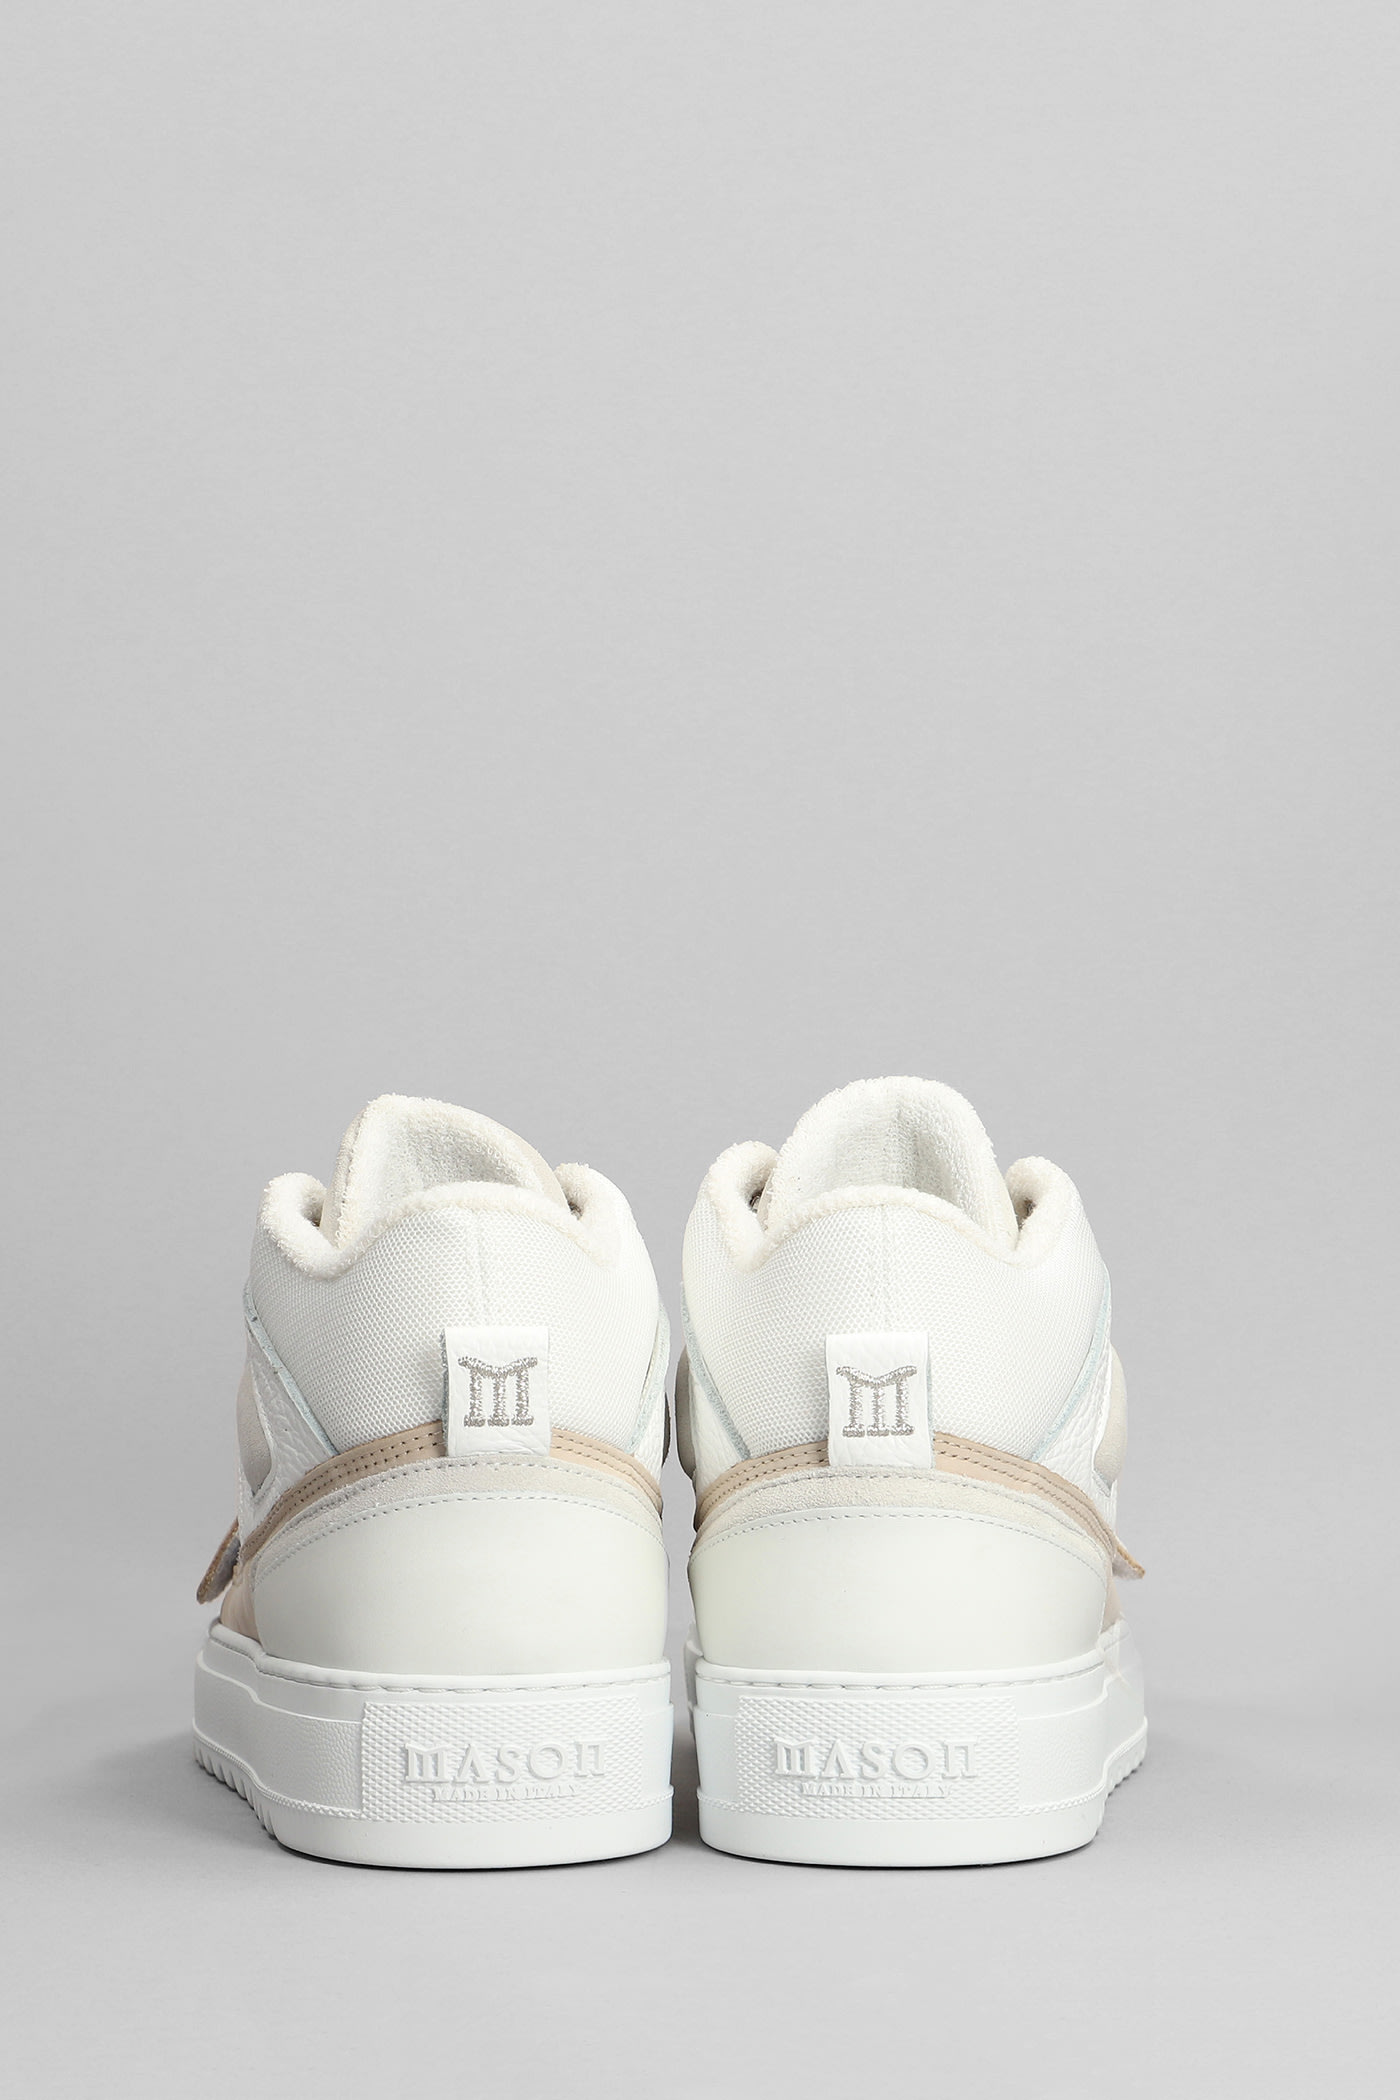 Shop Mason Garments Firenze Mid Sneakers In White Leather And Fabric